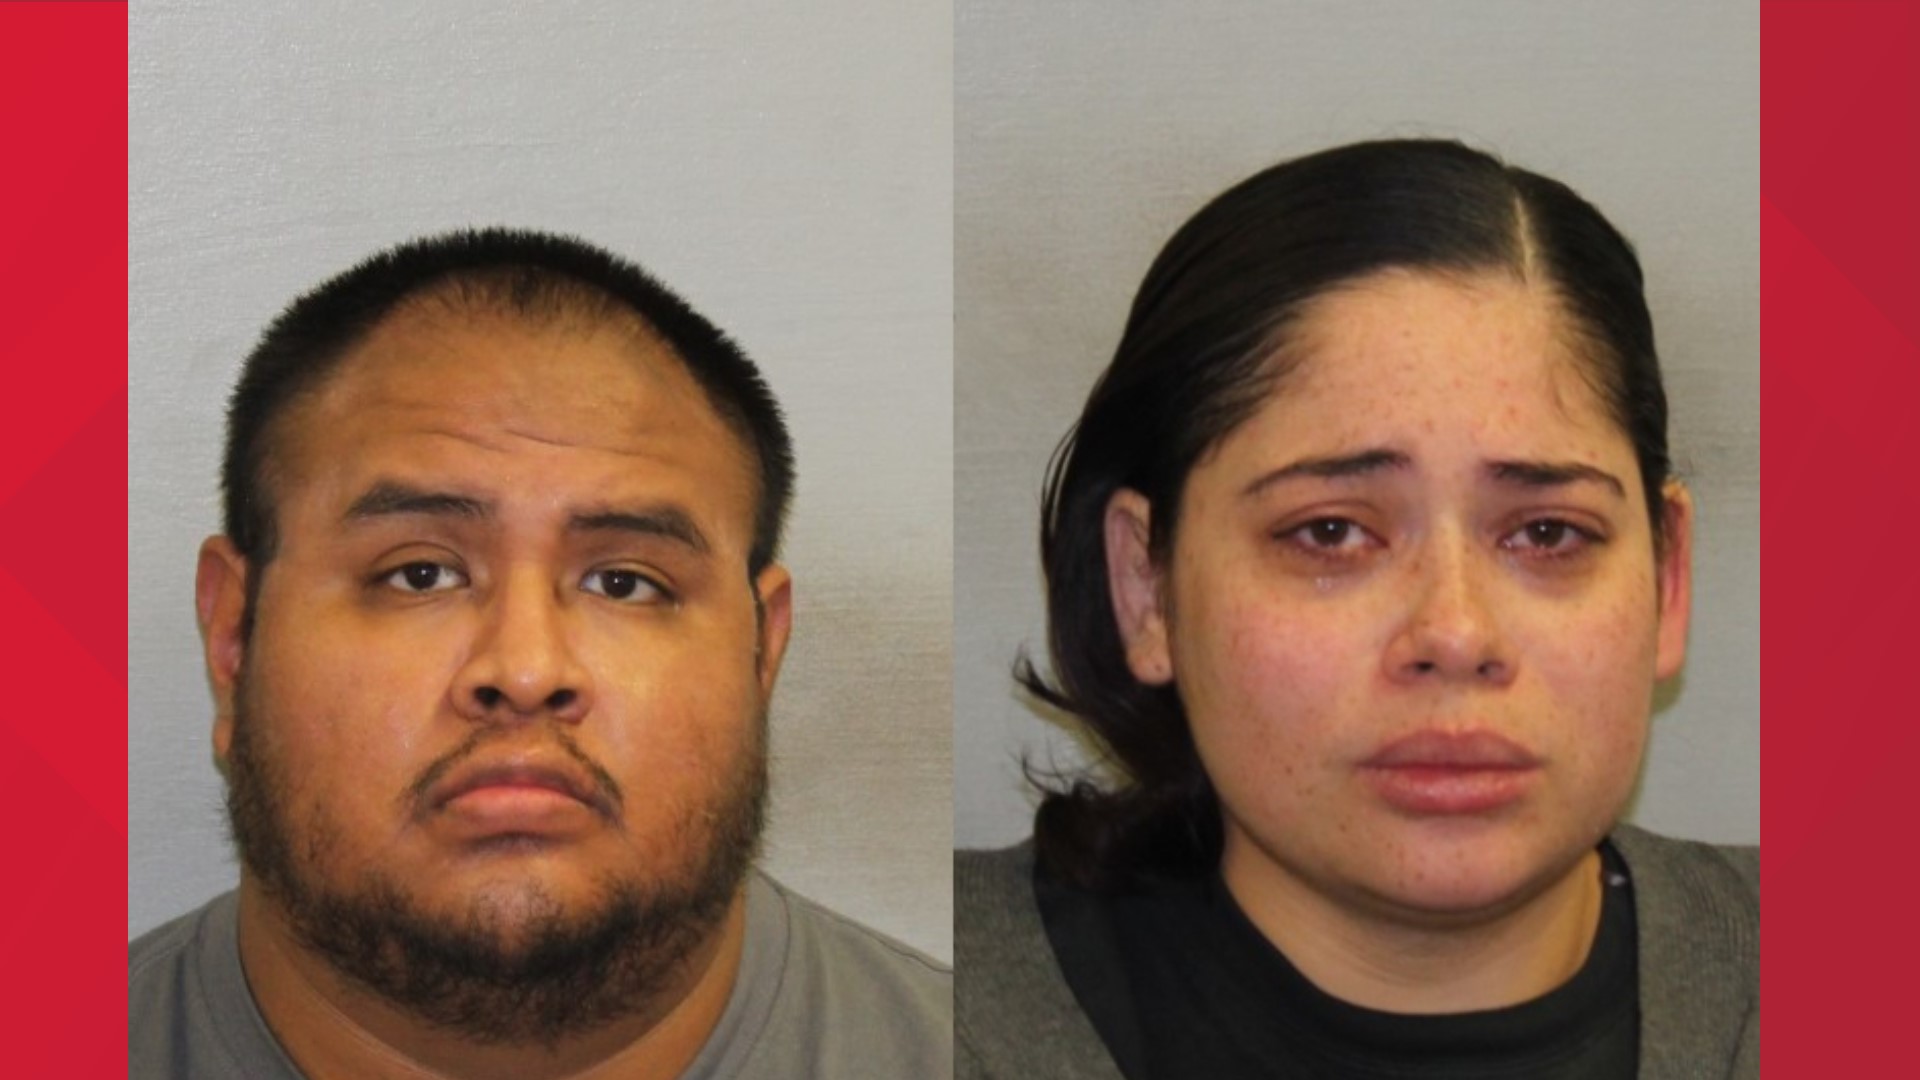 Two people were arrested for manslaughter in the death of a 4-year-old girl on Tuesday, Bristol and New Britain police said.